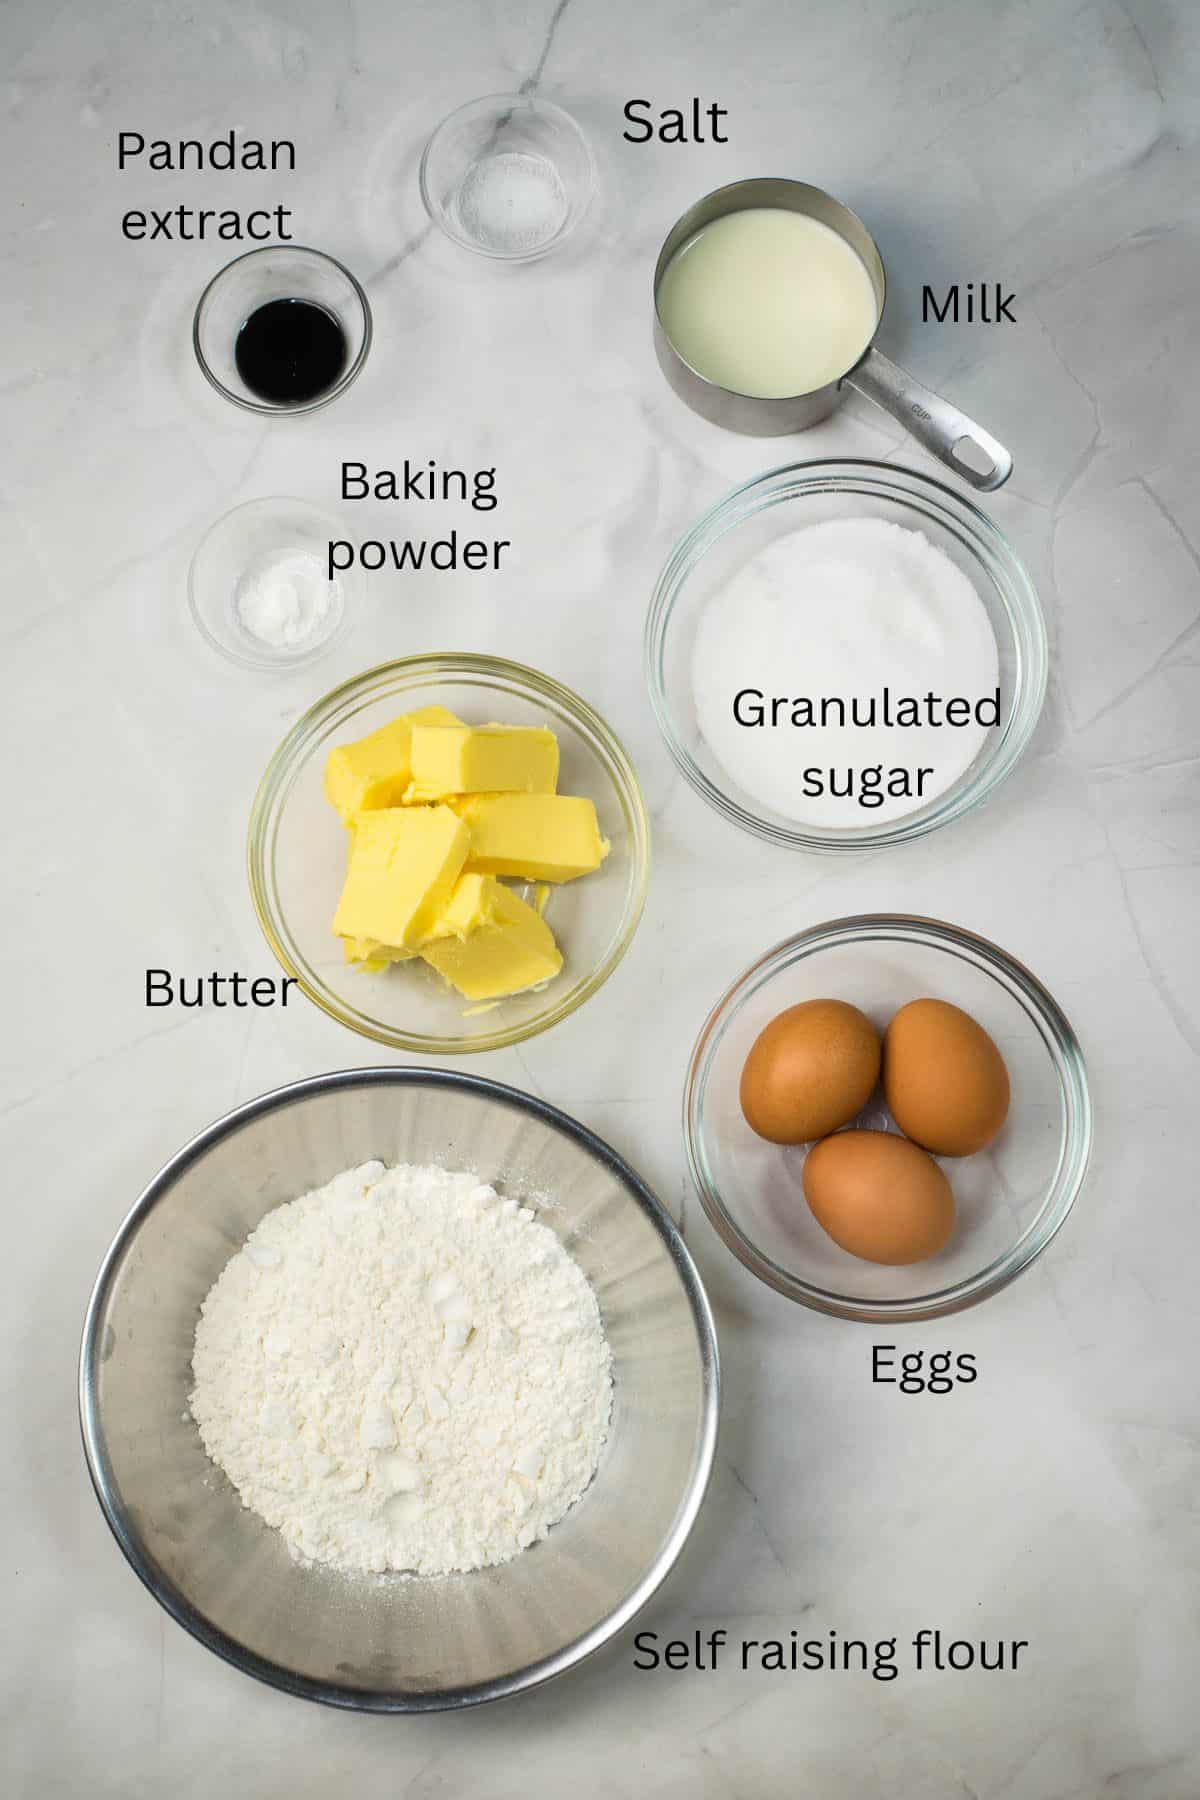 Self raising flour, eggs, butter, granulated sugar, milk, baking powder, salt and pandan extract in bowls against a marble background.